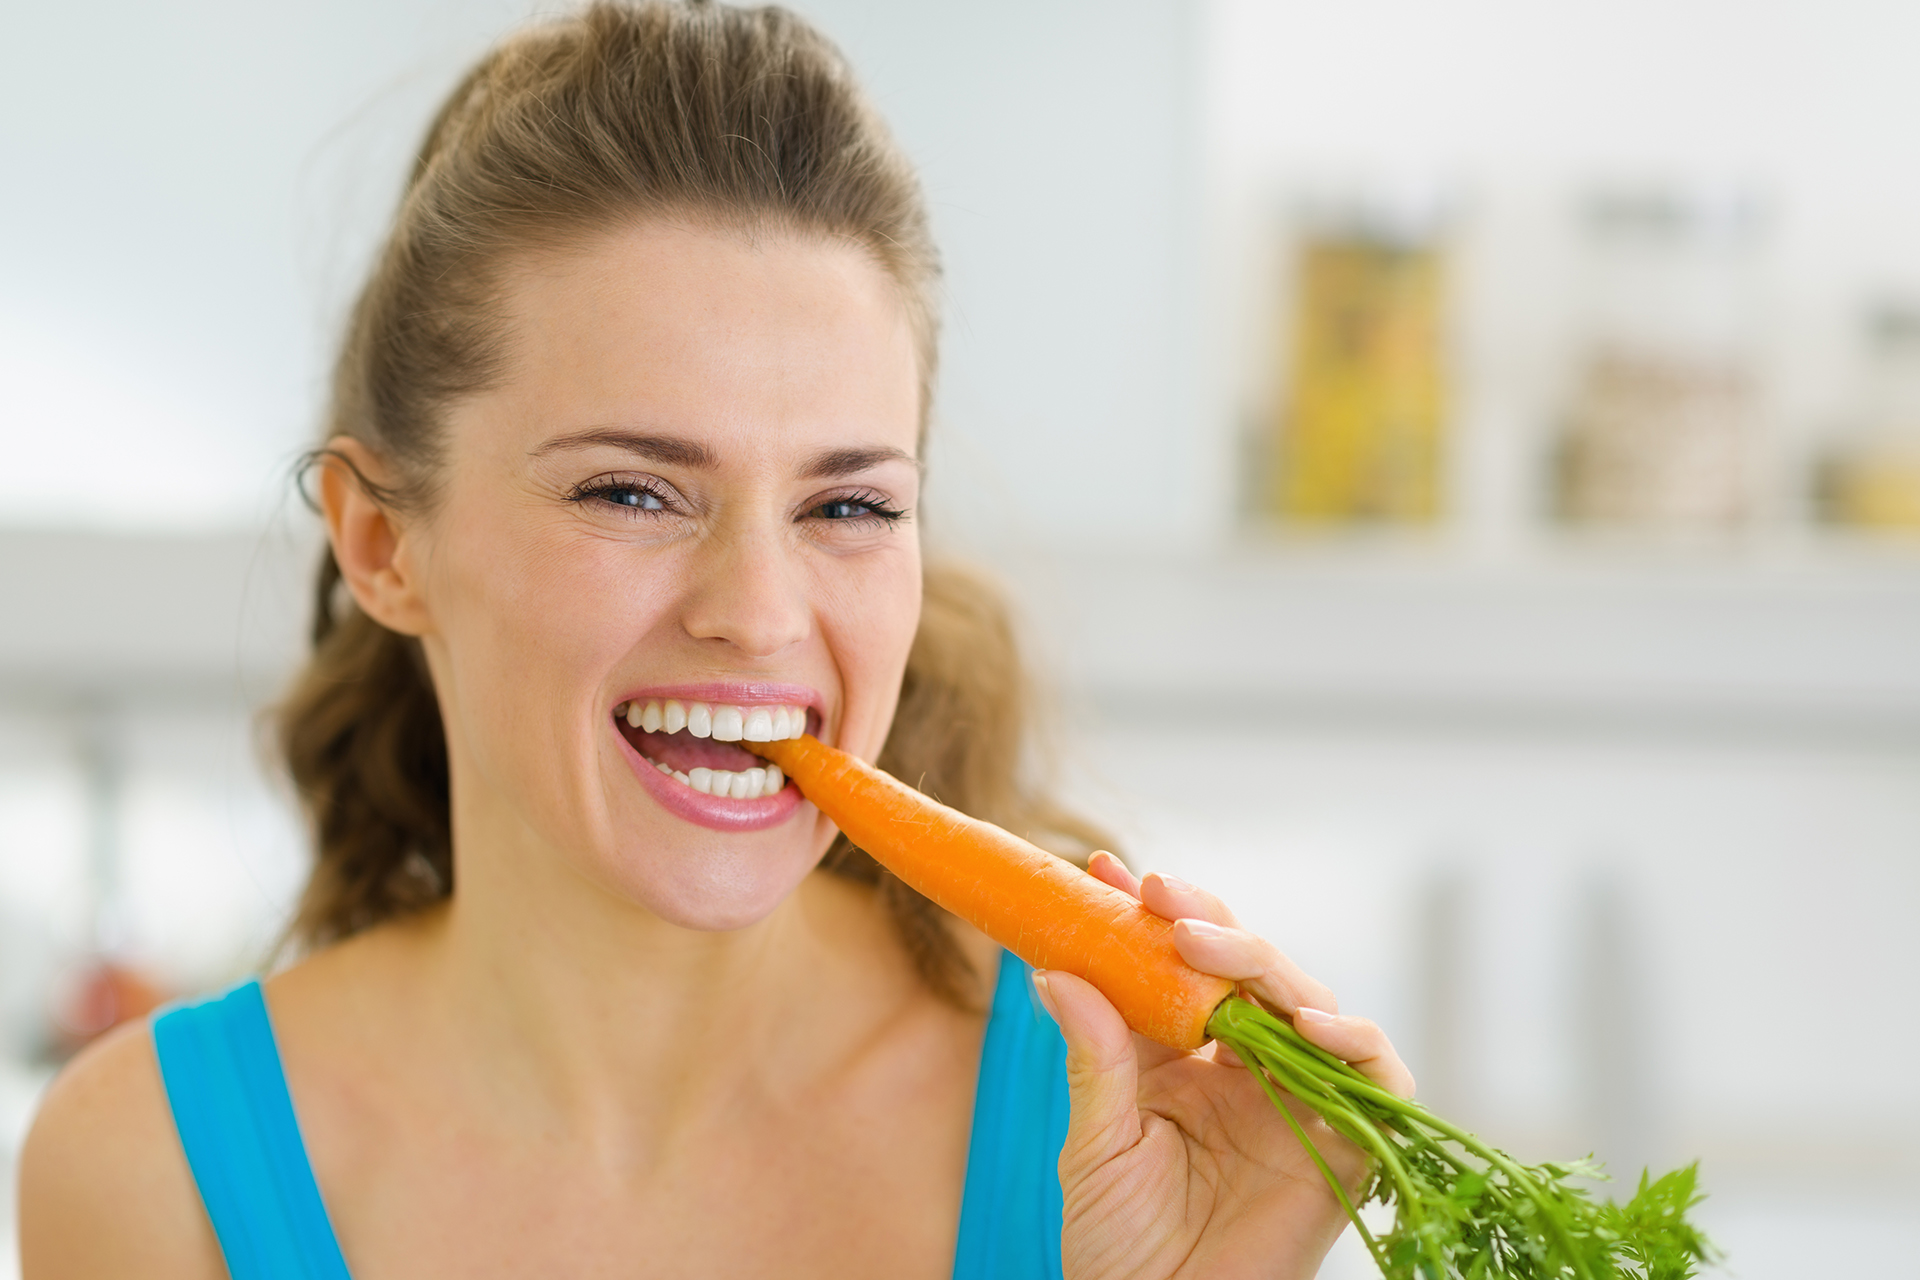 A woman is smiling while eating a carrot.